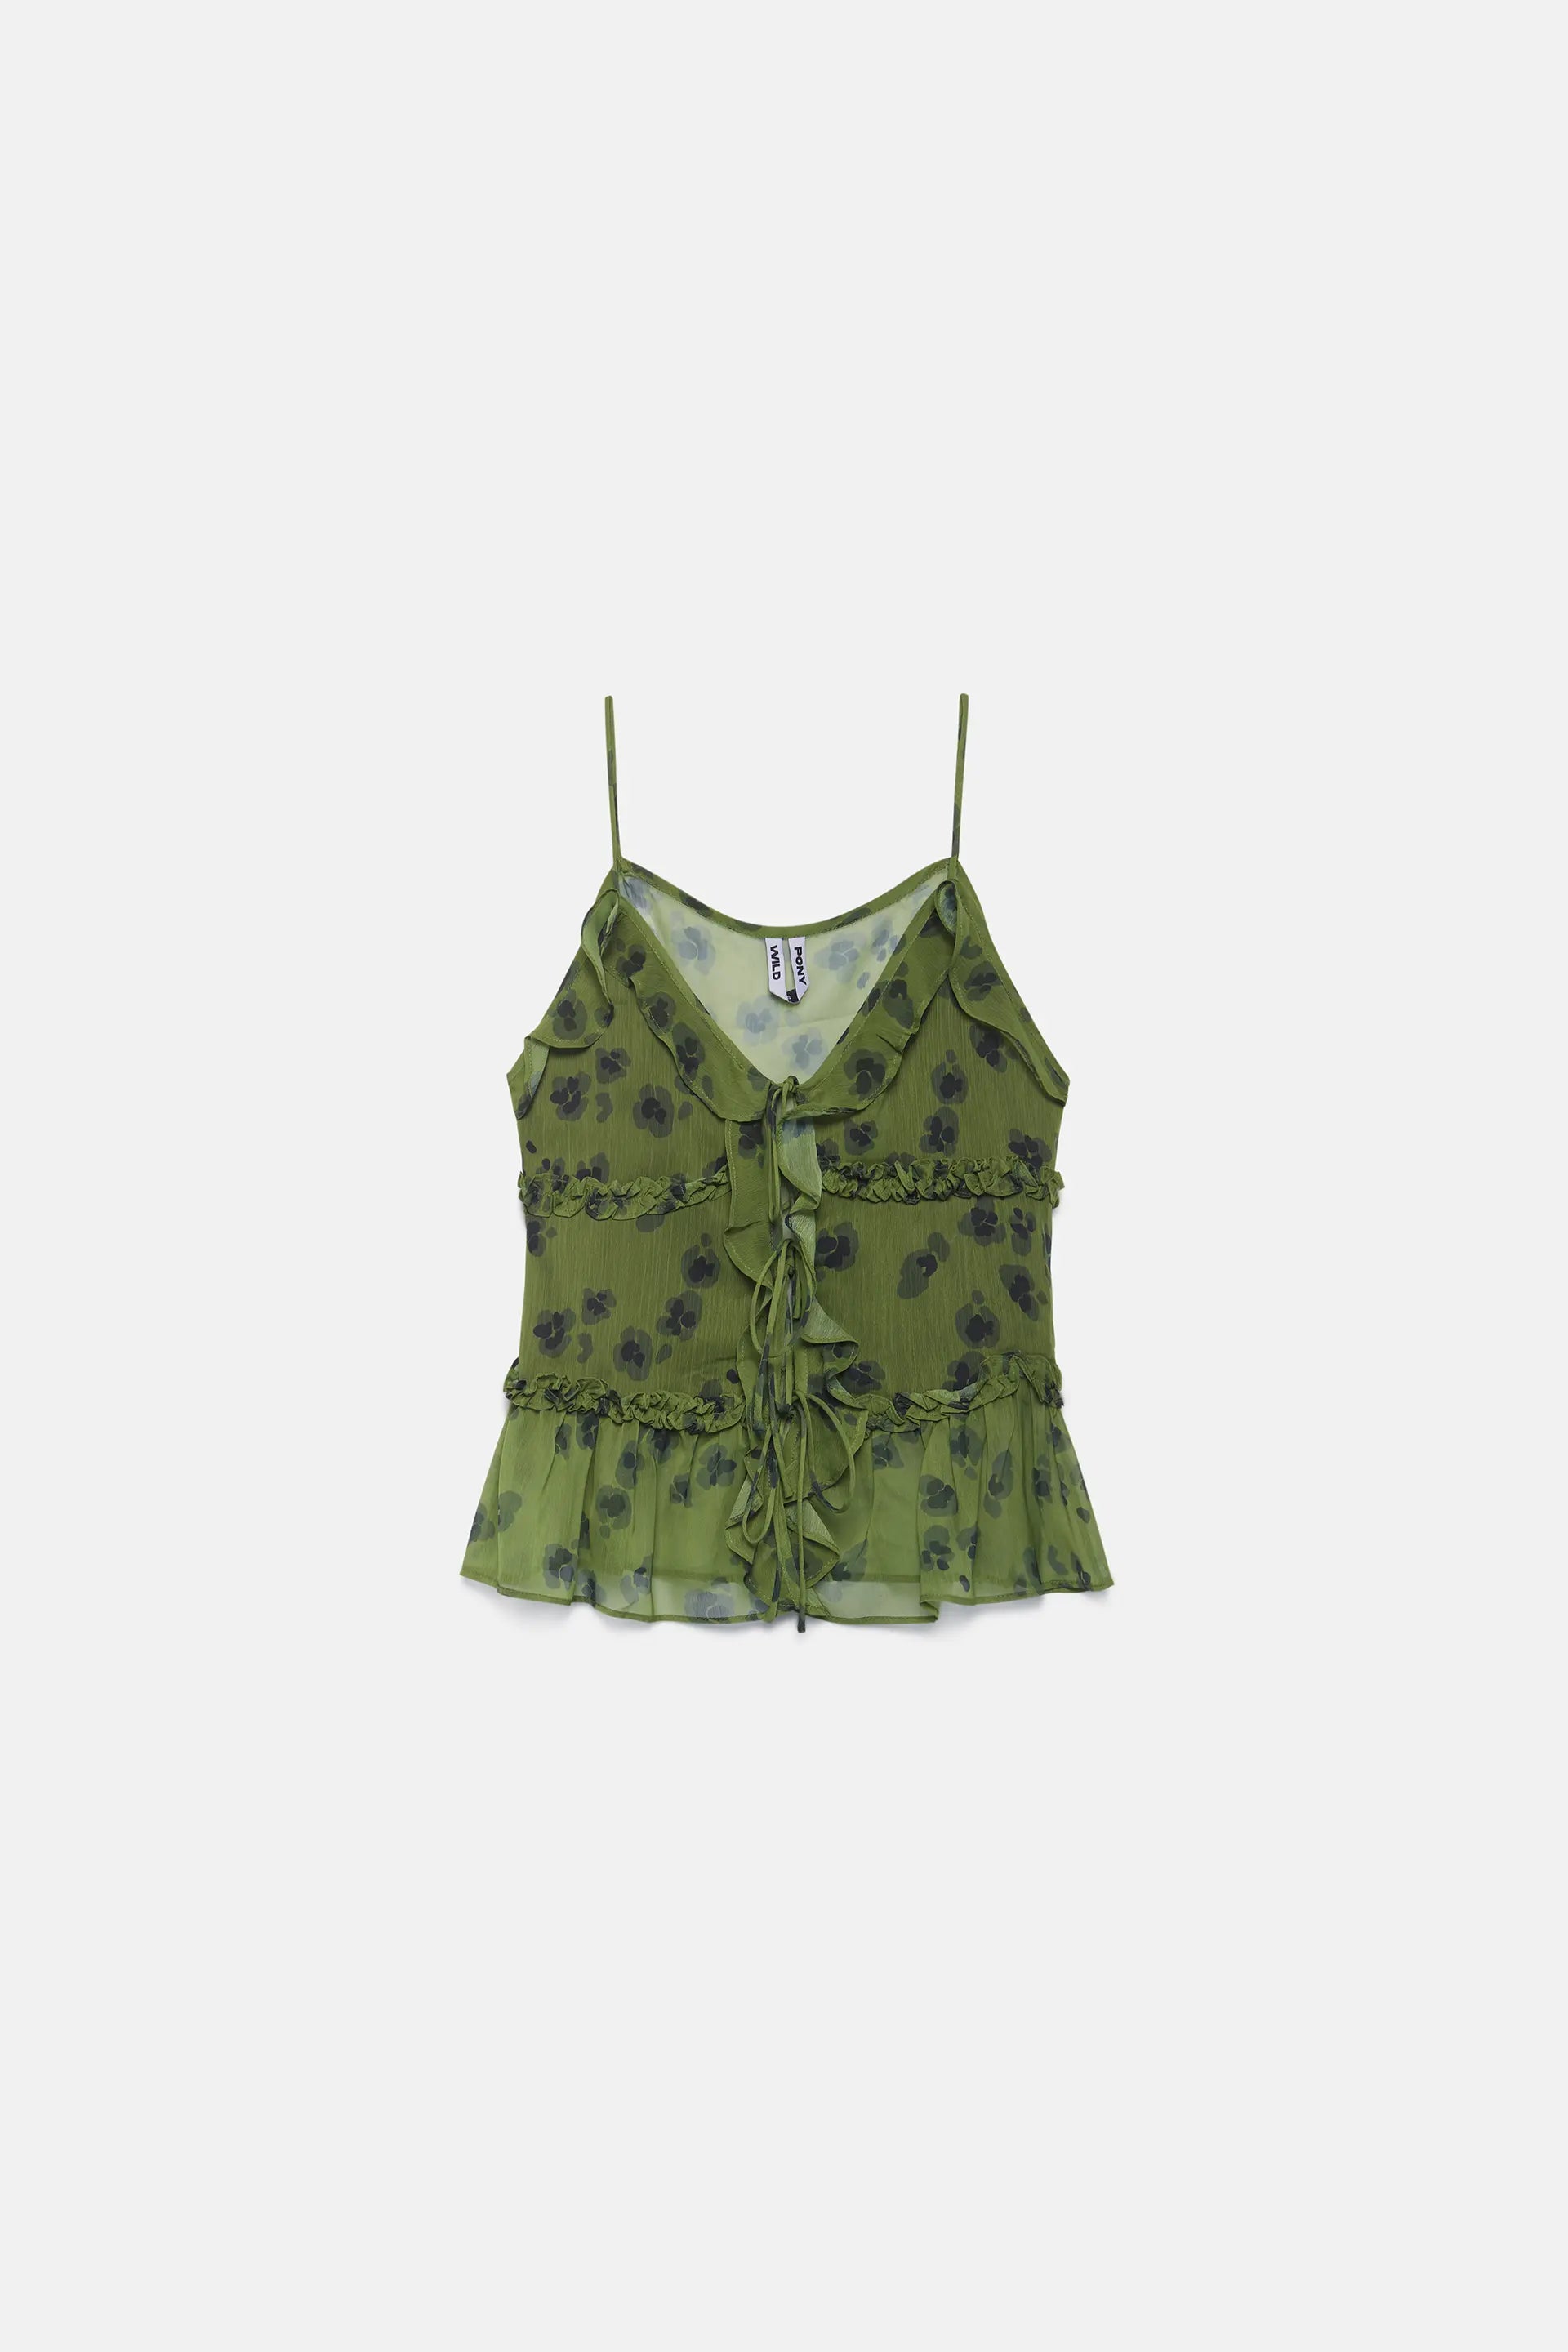 Wild Pony Camu floral ruffled strap top